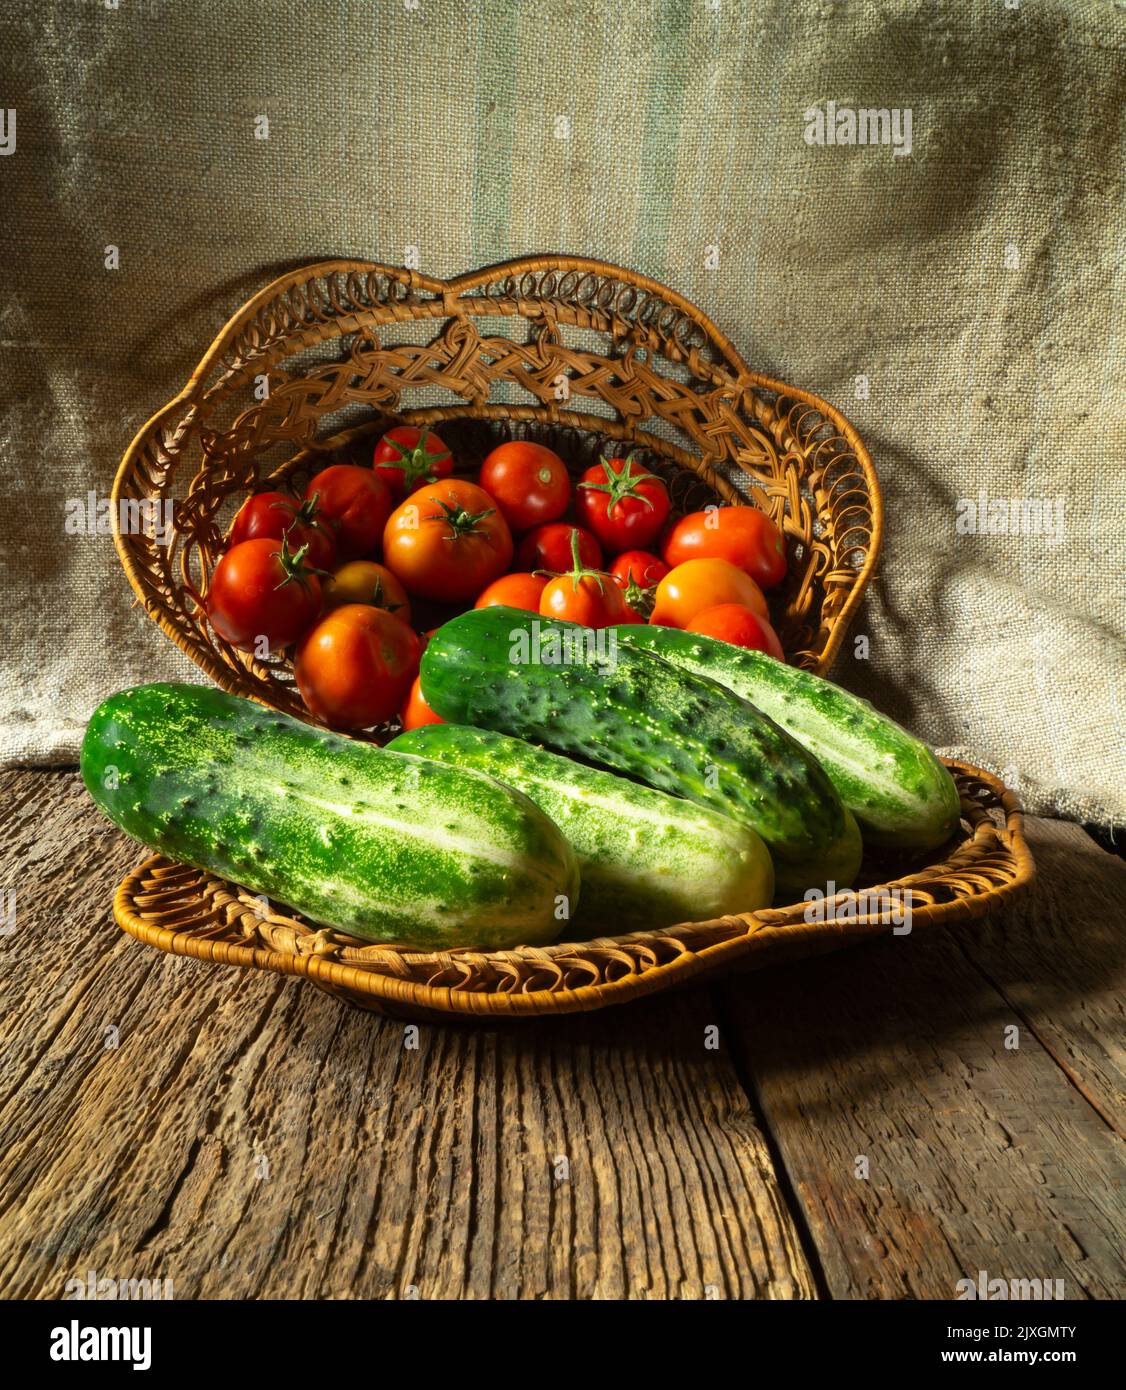 Vegetables on the background of burlap close-up. Food in the basket. Summer harvest on the table Stock Photo